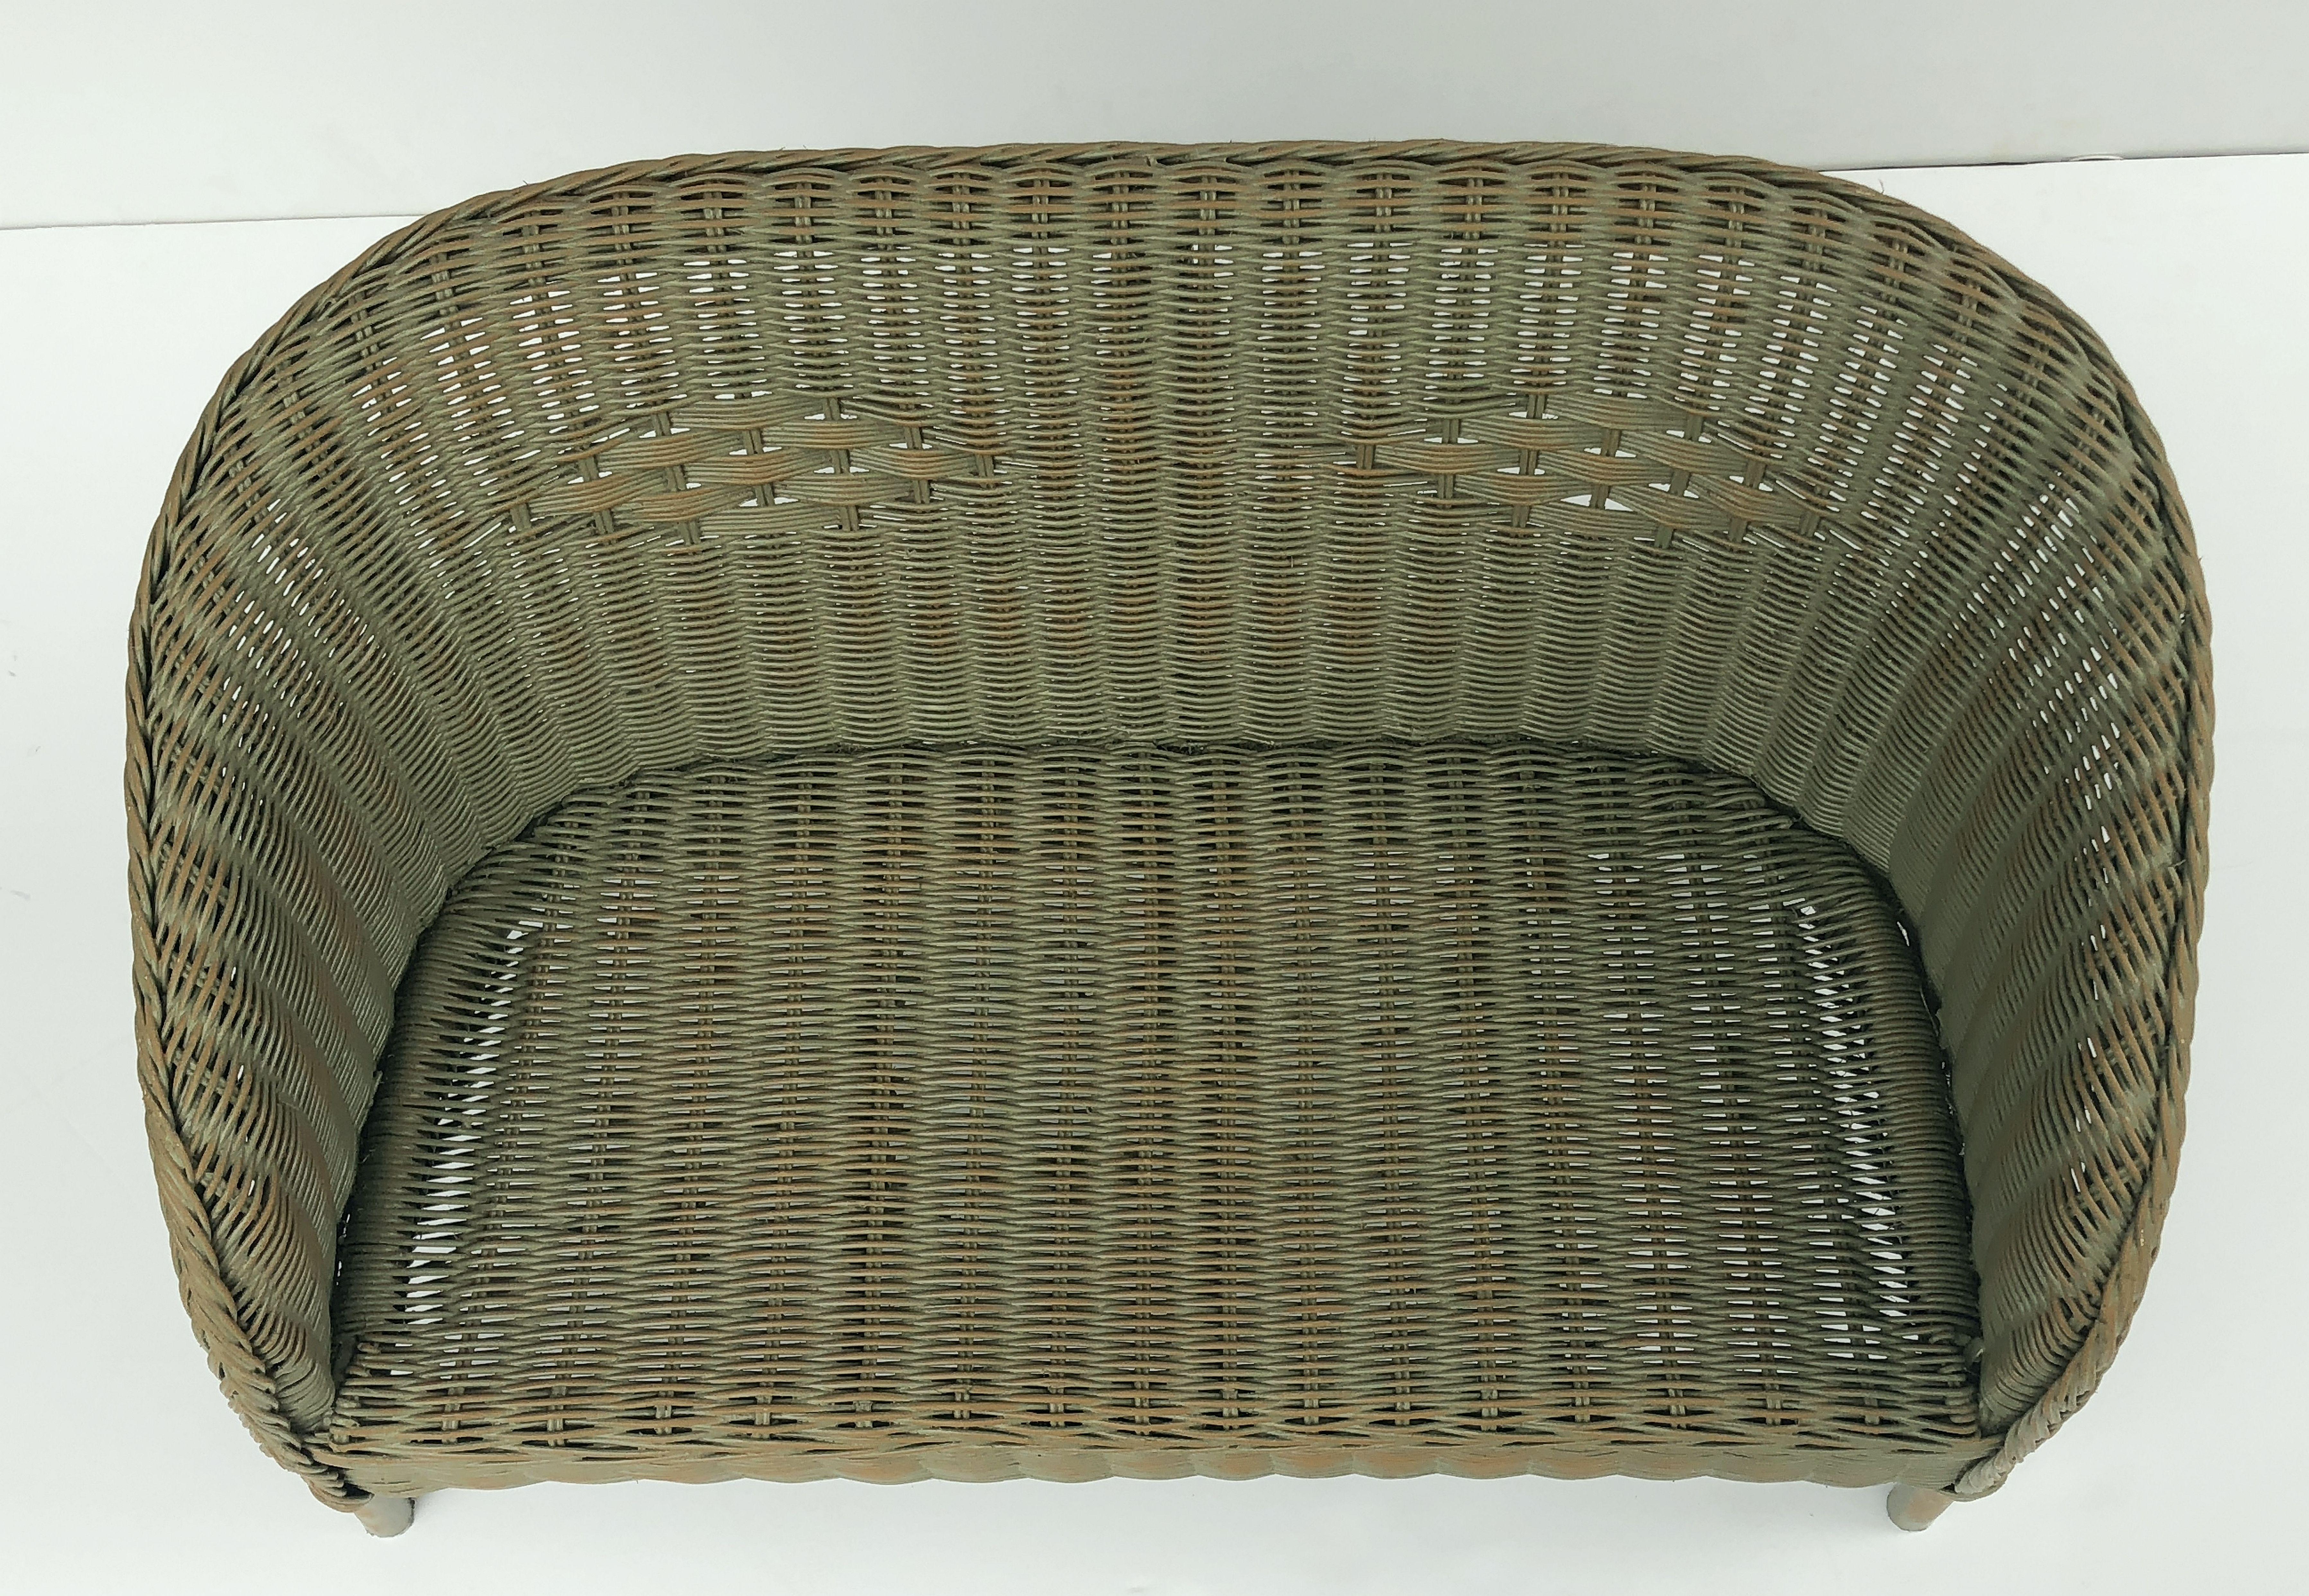 20th Century English Wicker Garden Child's Settee Bench or Seat by Lloyd Loom